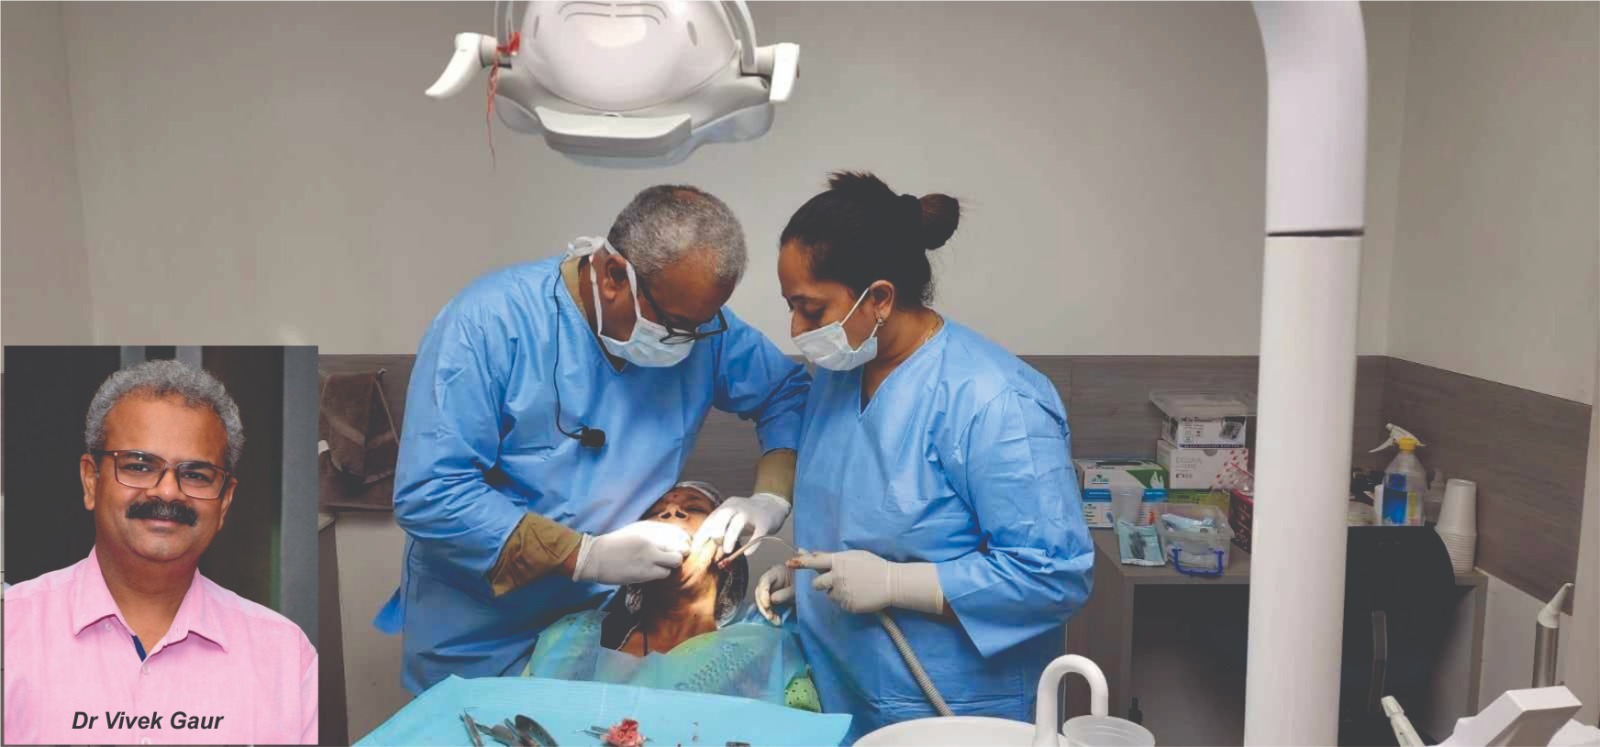 Revolutionizing Smiles: Dr Vivek Gaur Pioneers Corticobasal Immediate Loading Dental Implants, Offering a New Dawn for Patients with Missing Teeth